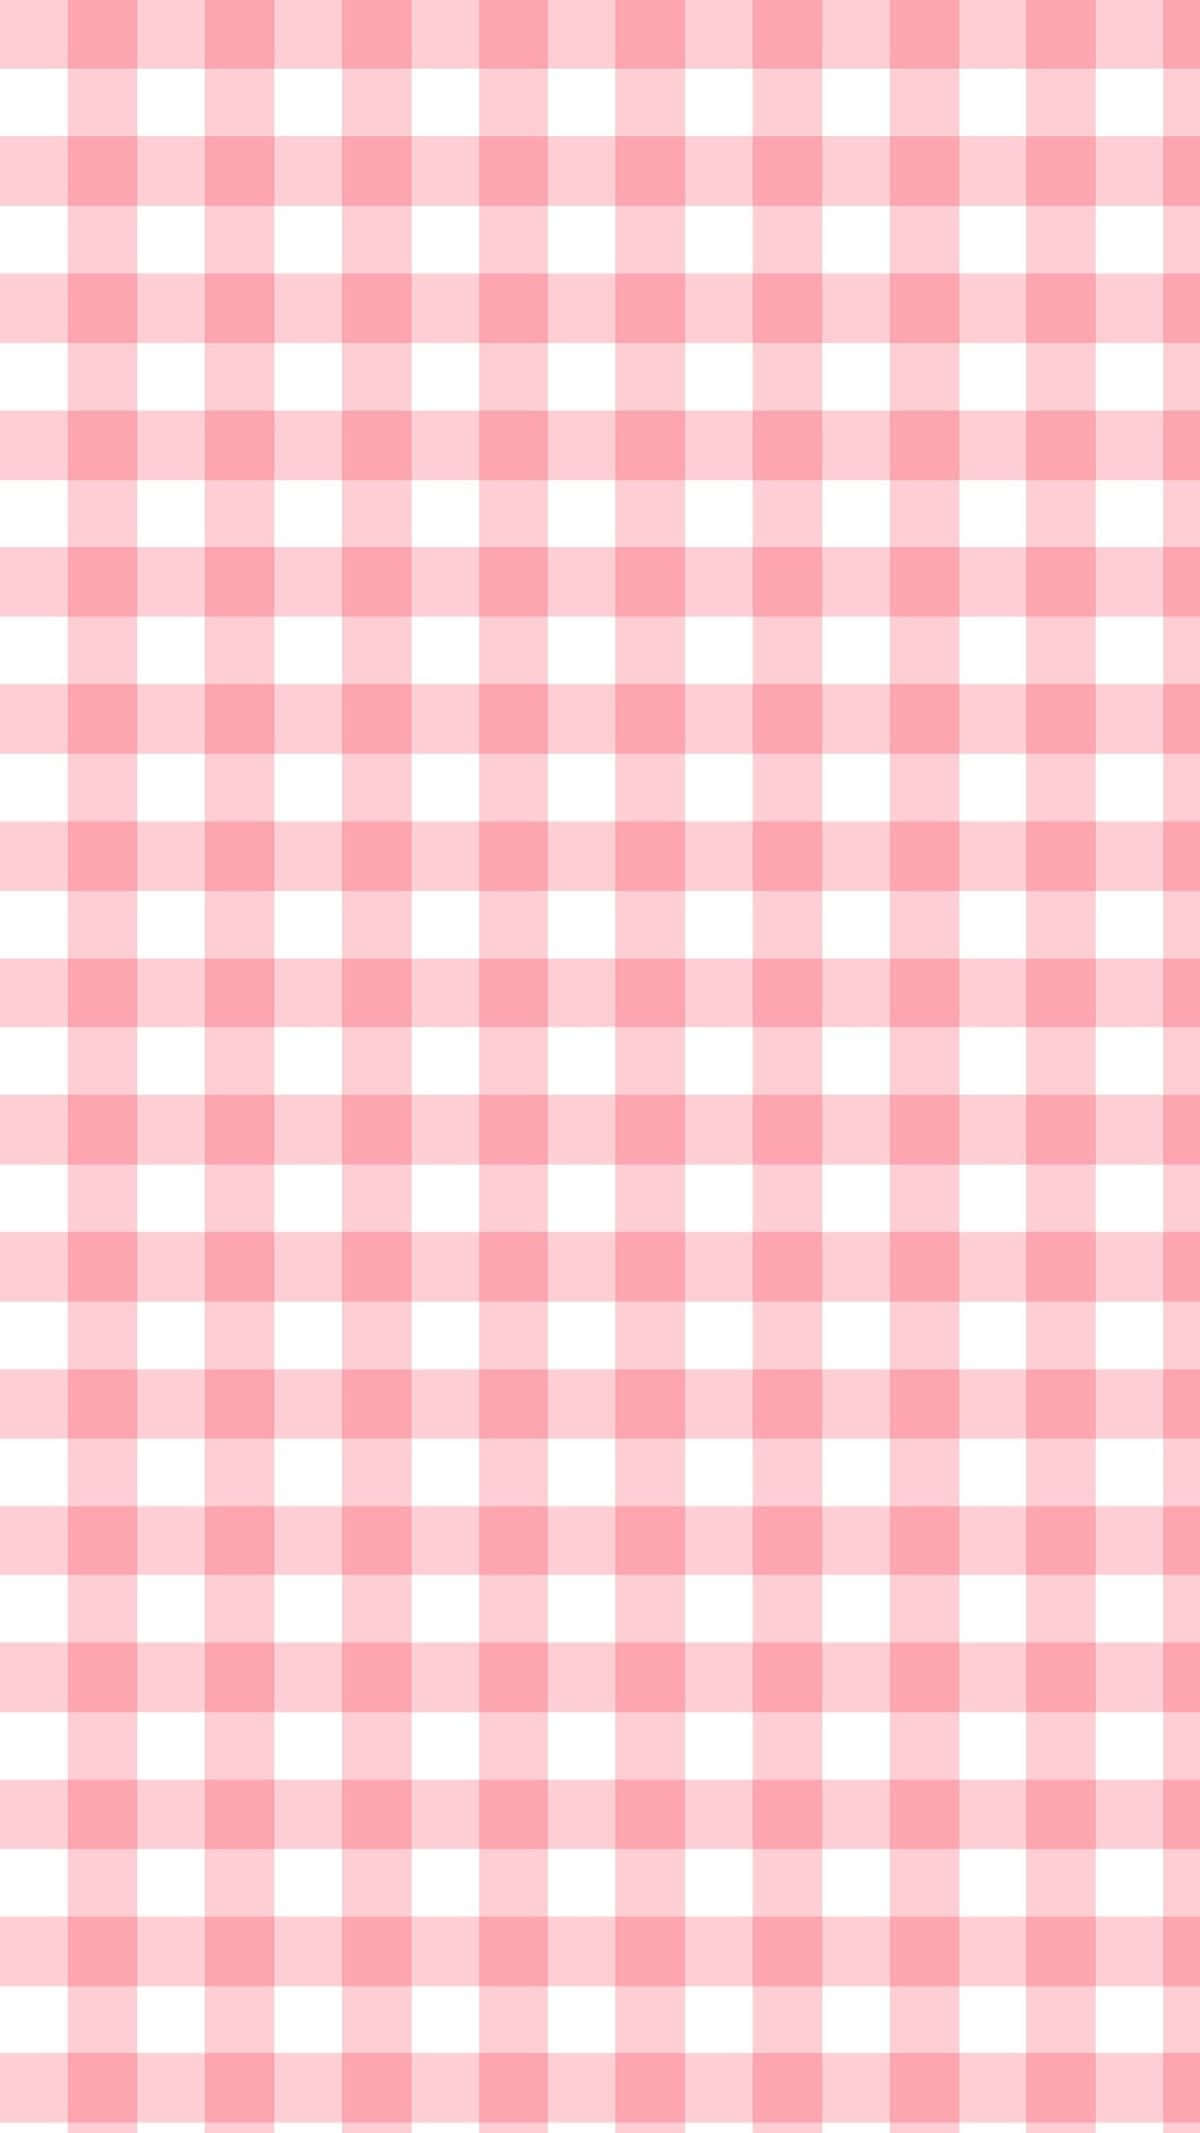 Abstract Pink Grid Background